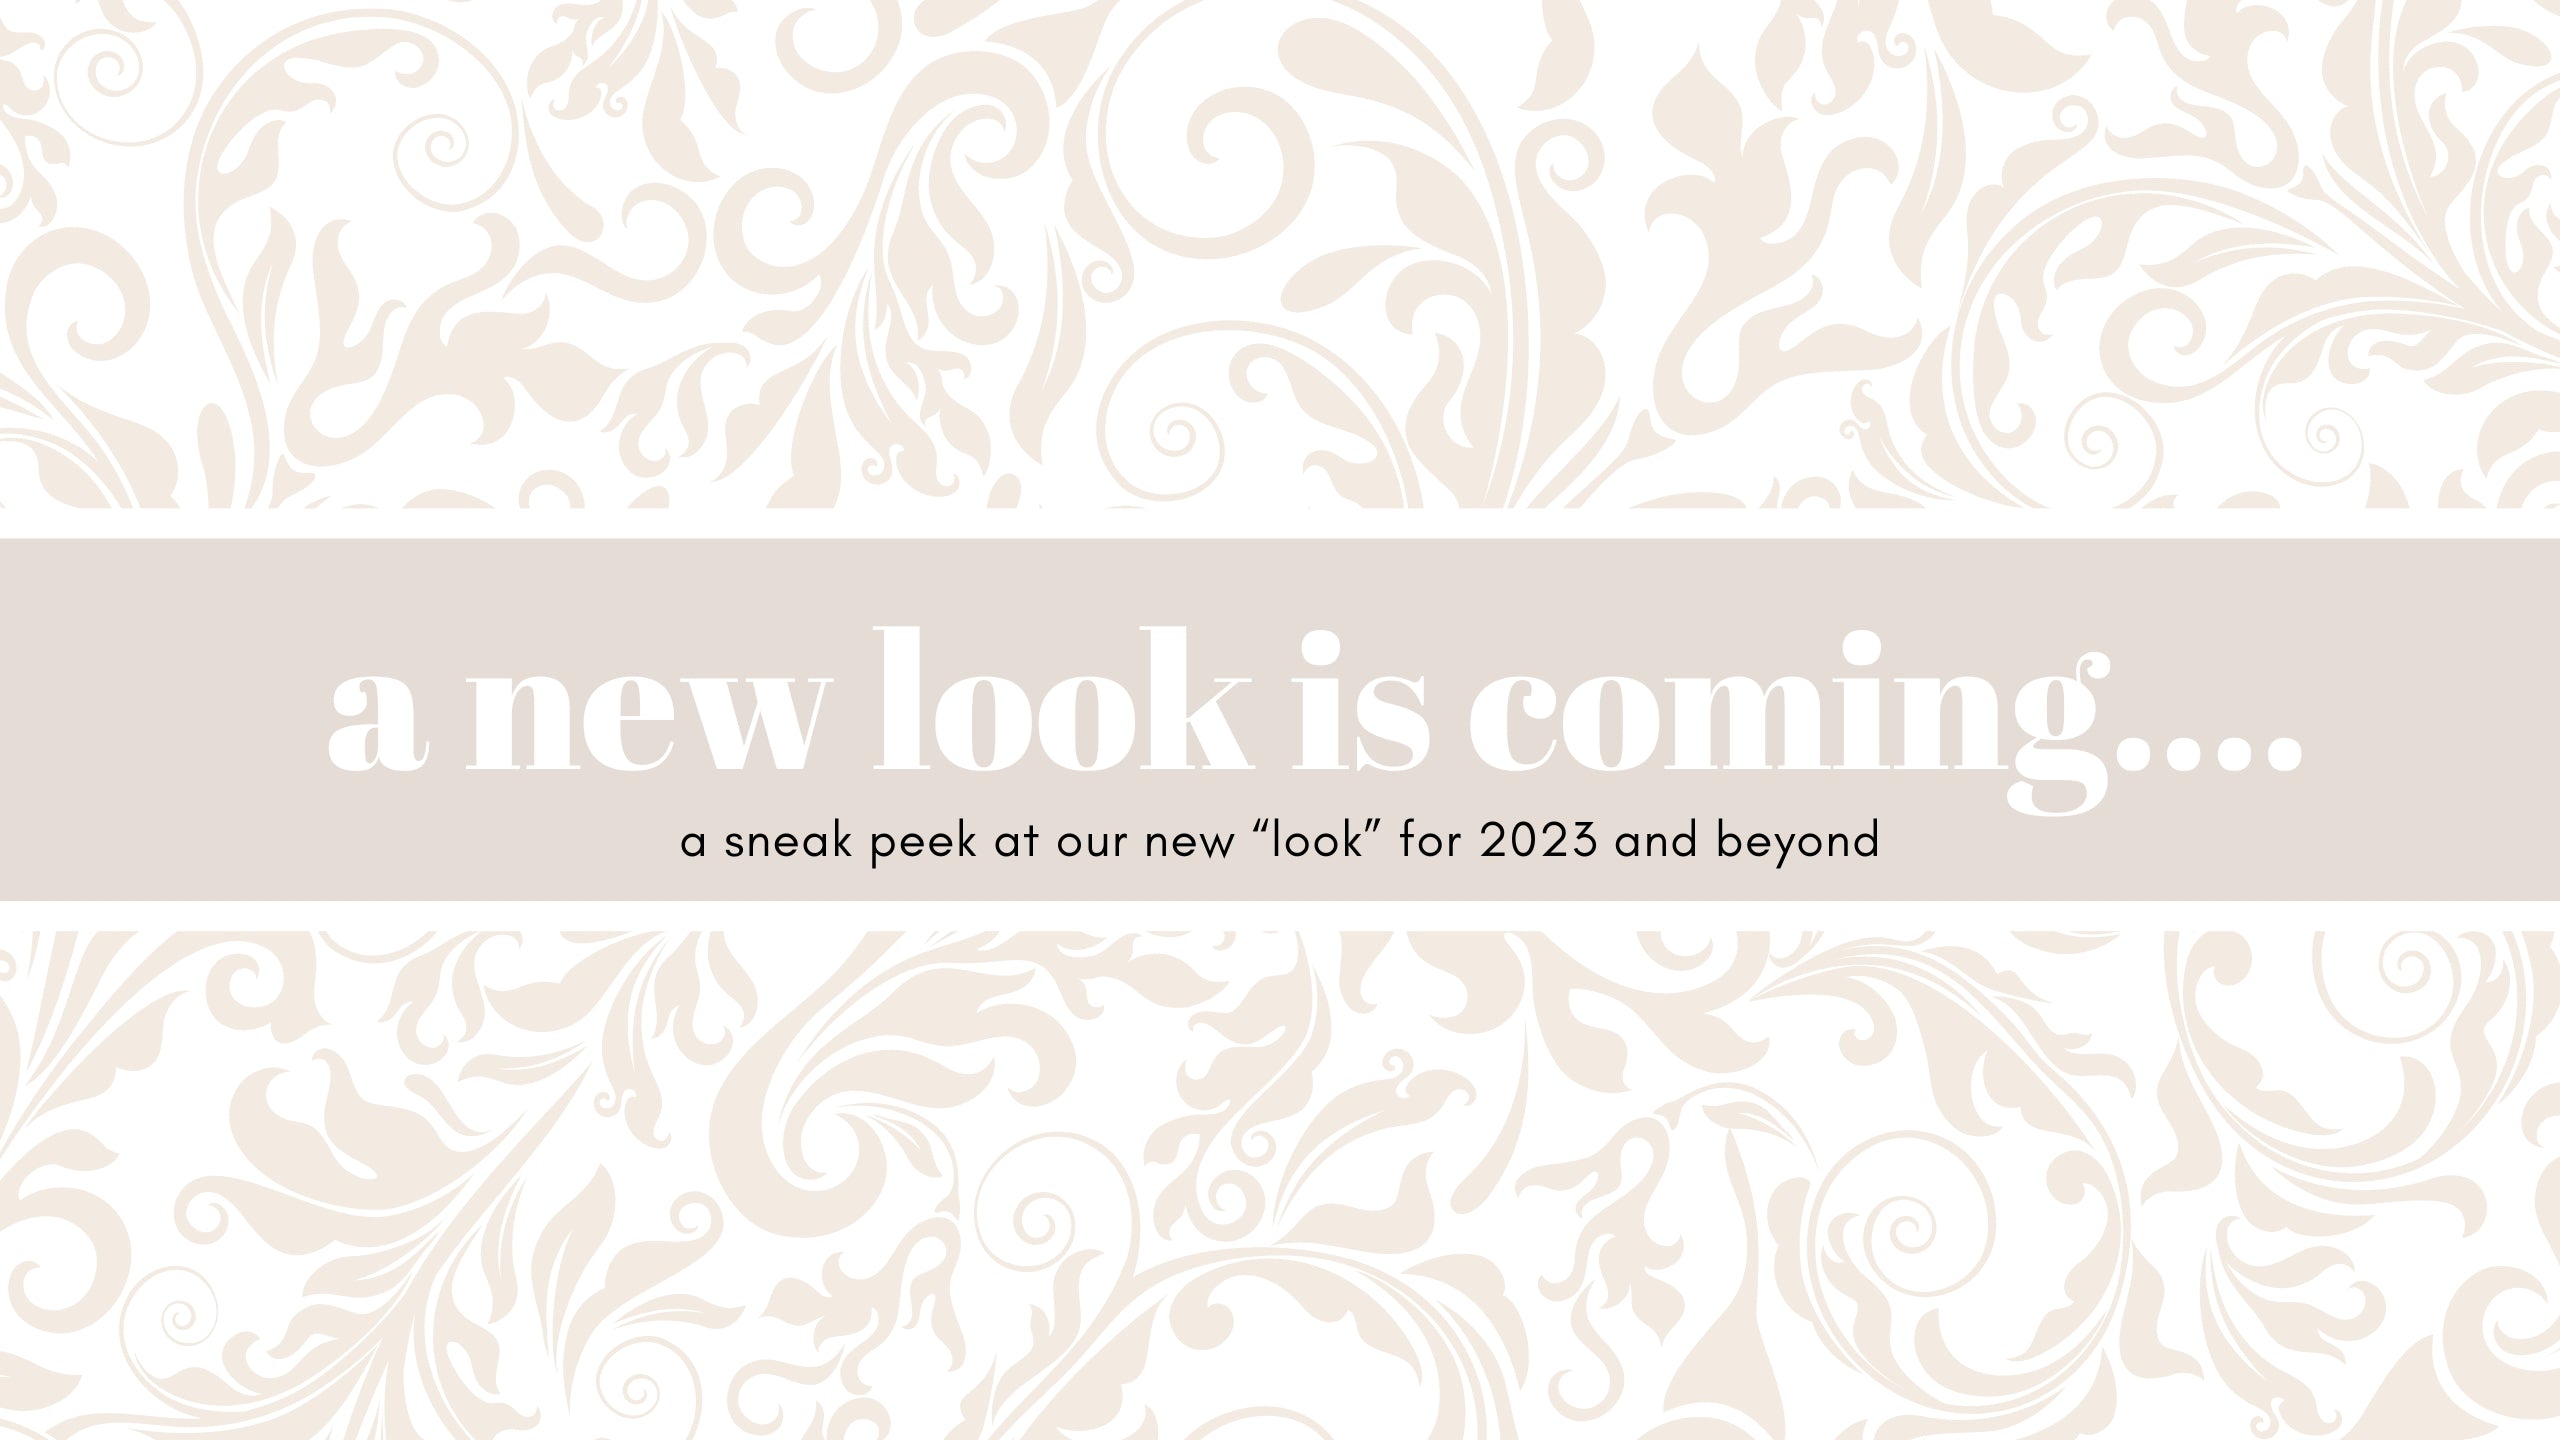 A new look is coming……